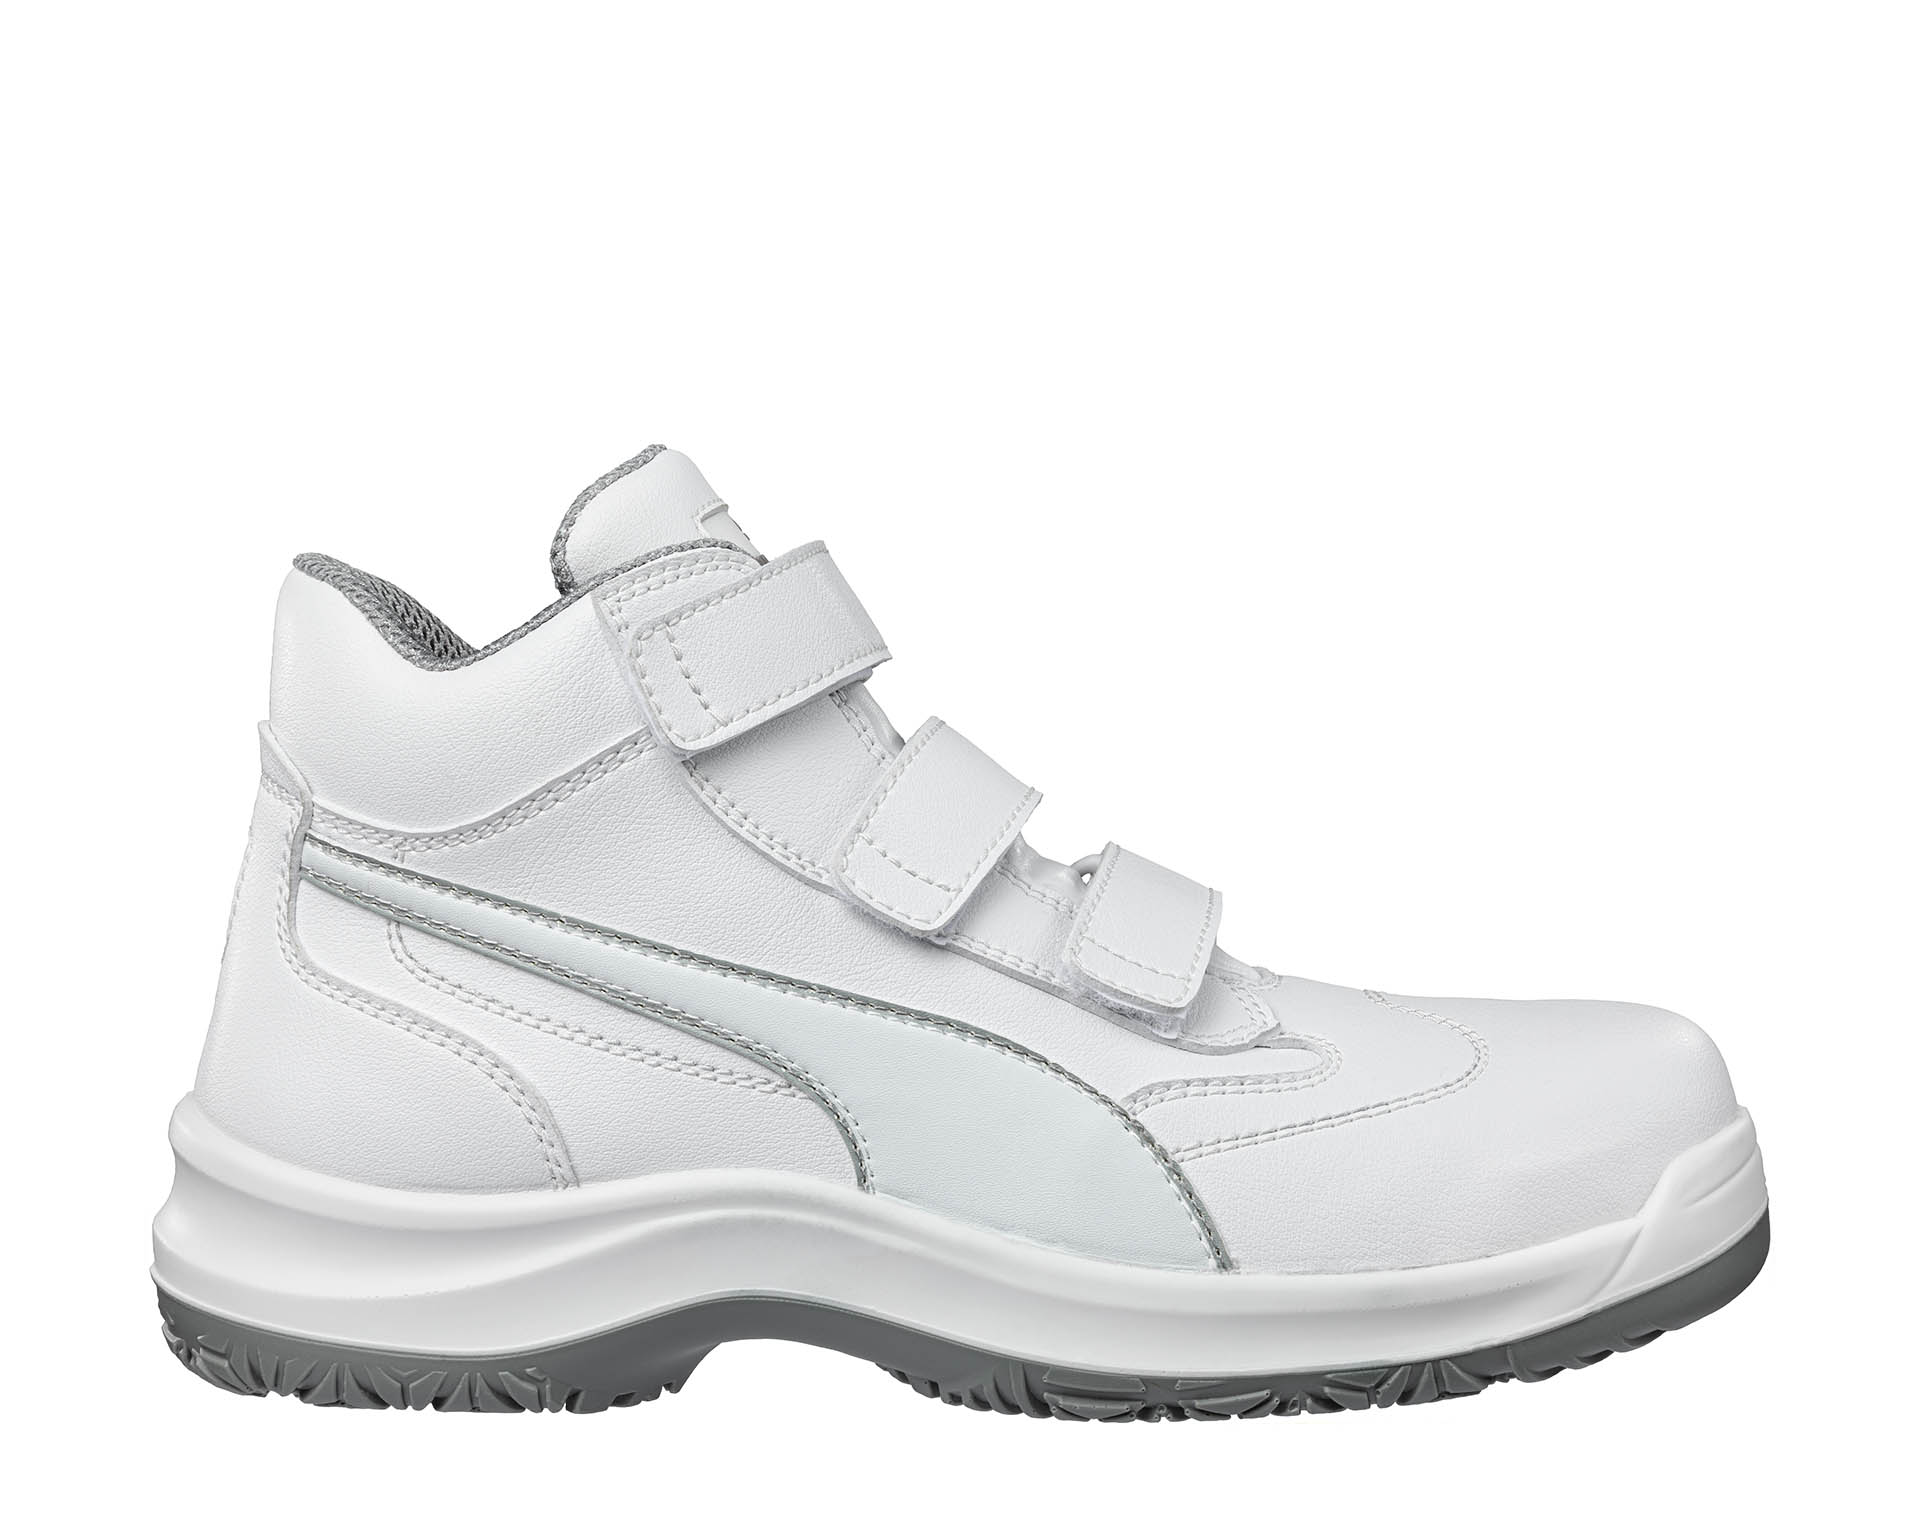 PUMA SAFETY safety shoes S2 SRC ABSOLUTE MID | Puma Safety English